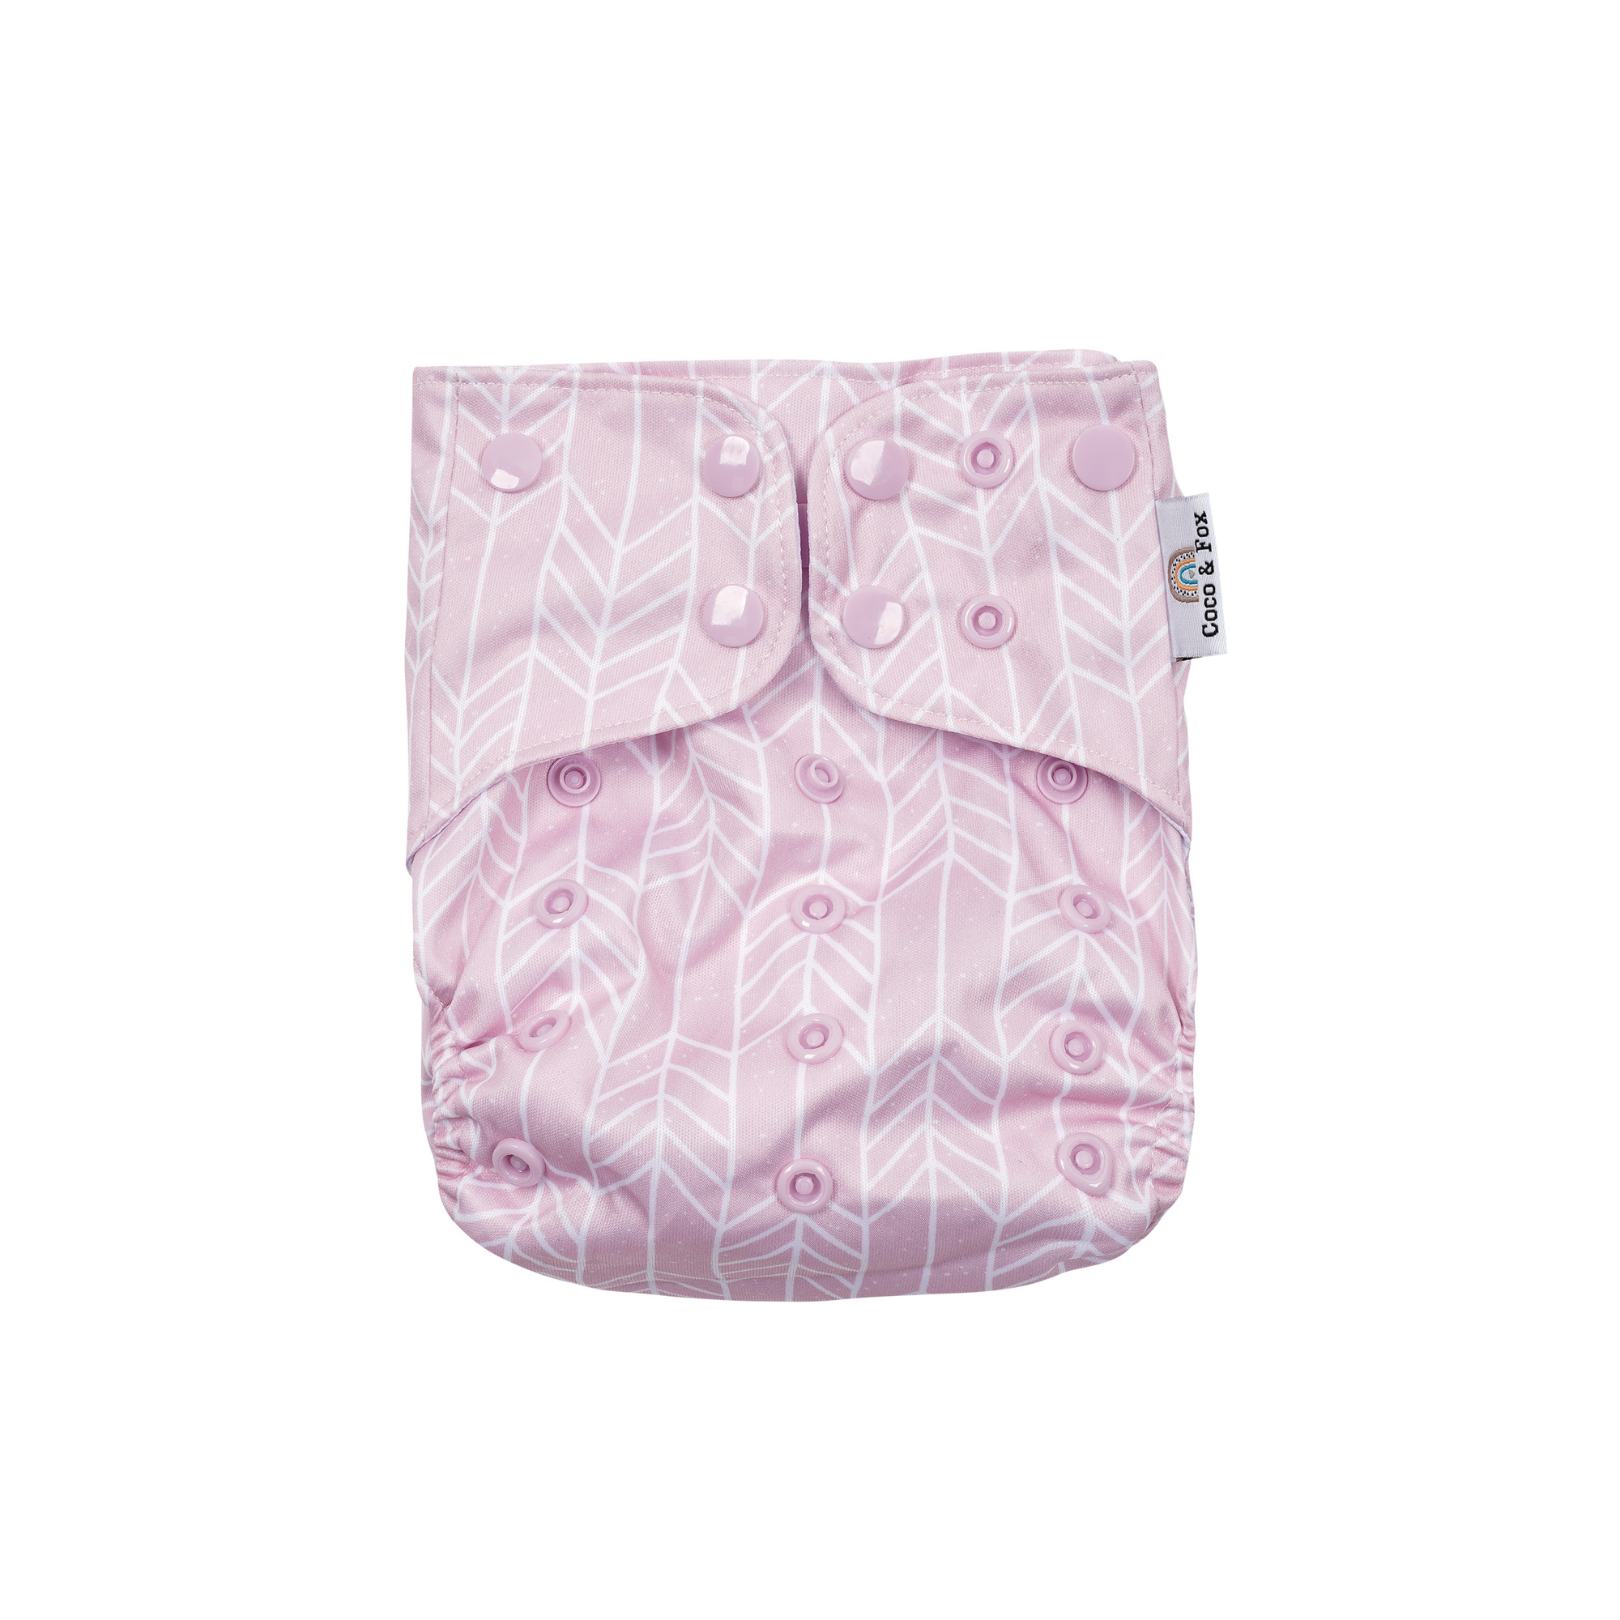 Reusable Swim Nappy in Soft Pink